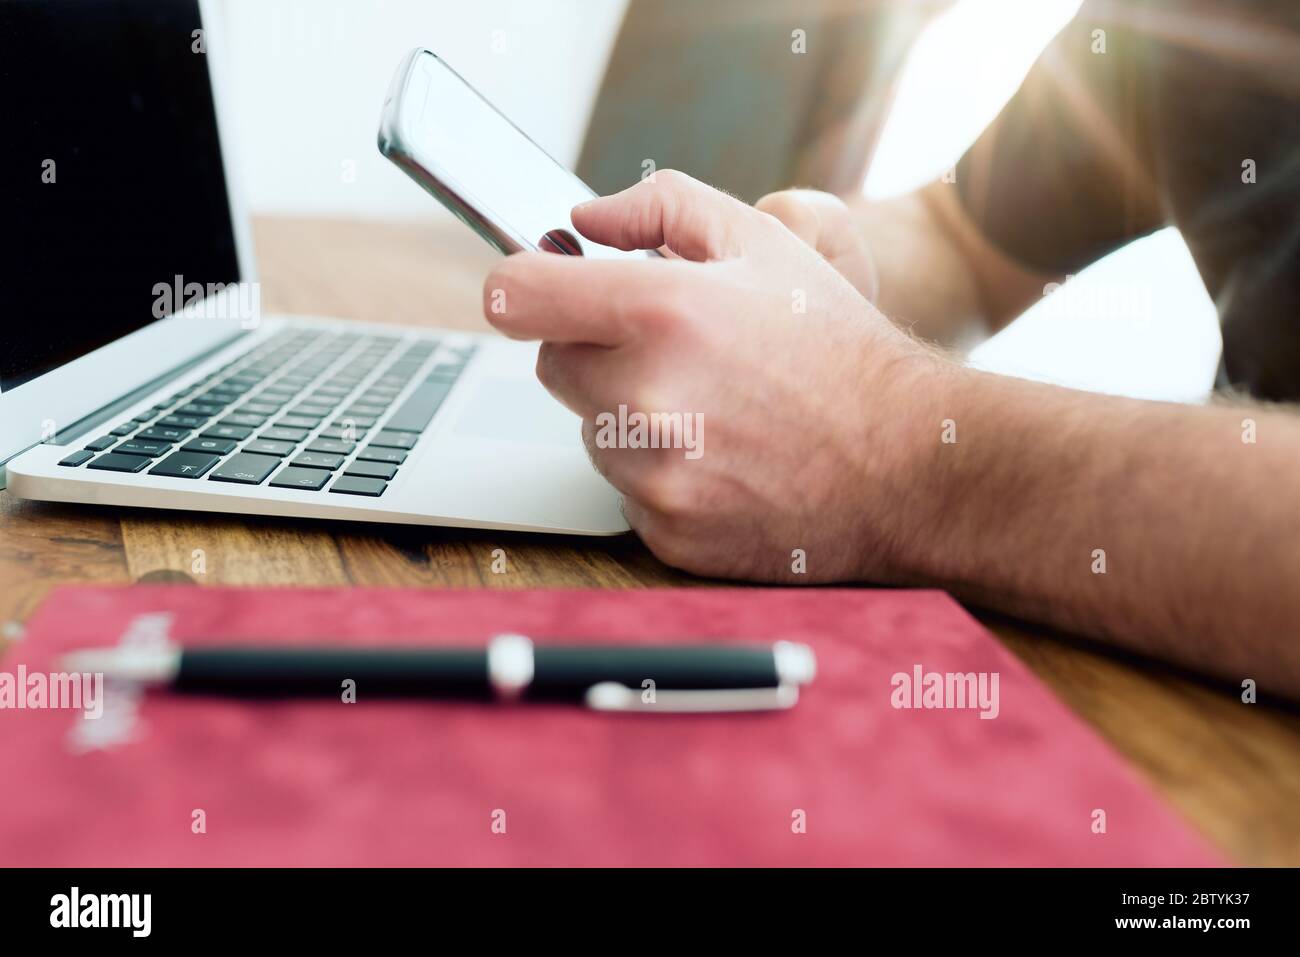 close-up of man using smartphone in front of laptop computer in home office Stock Photo